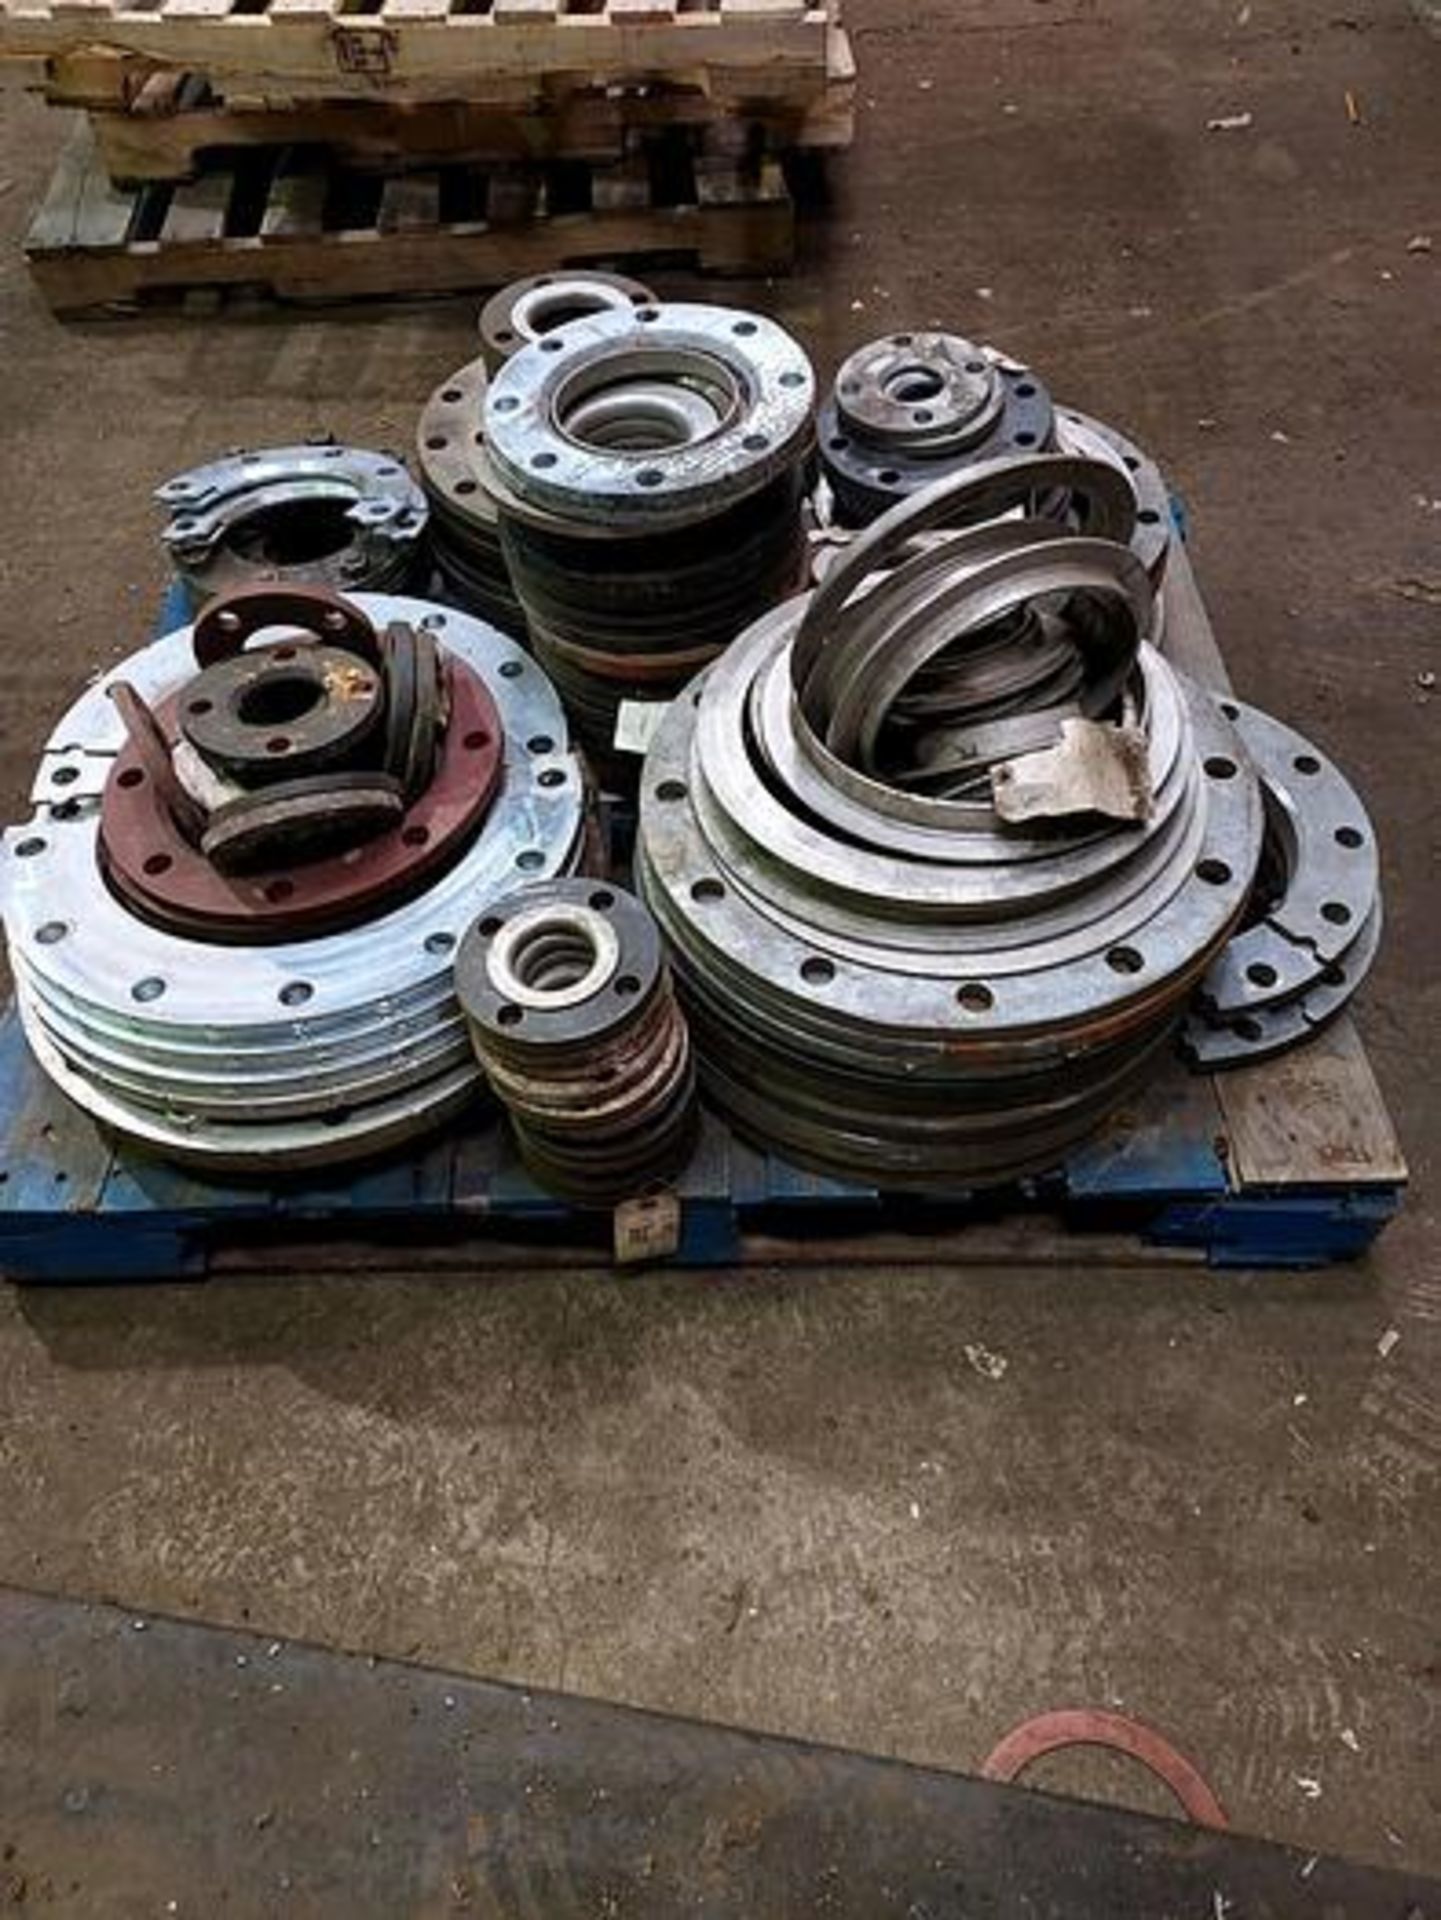 METAL FLANGES RINGS AND TUBING IN VARIOUS SIZES - Image 2 of 4